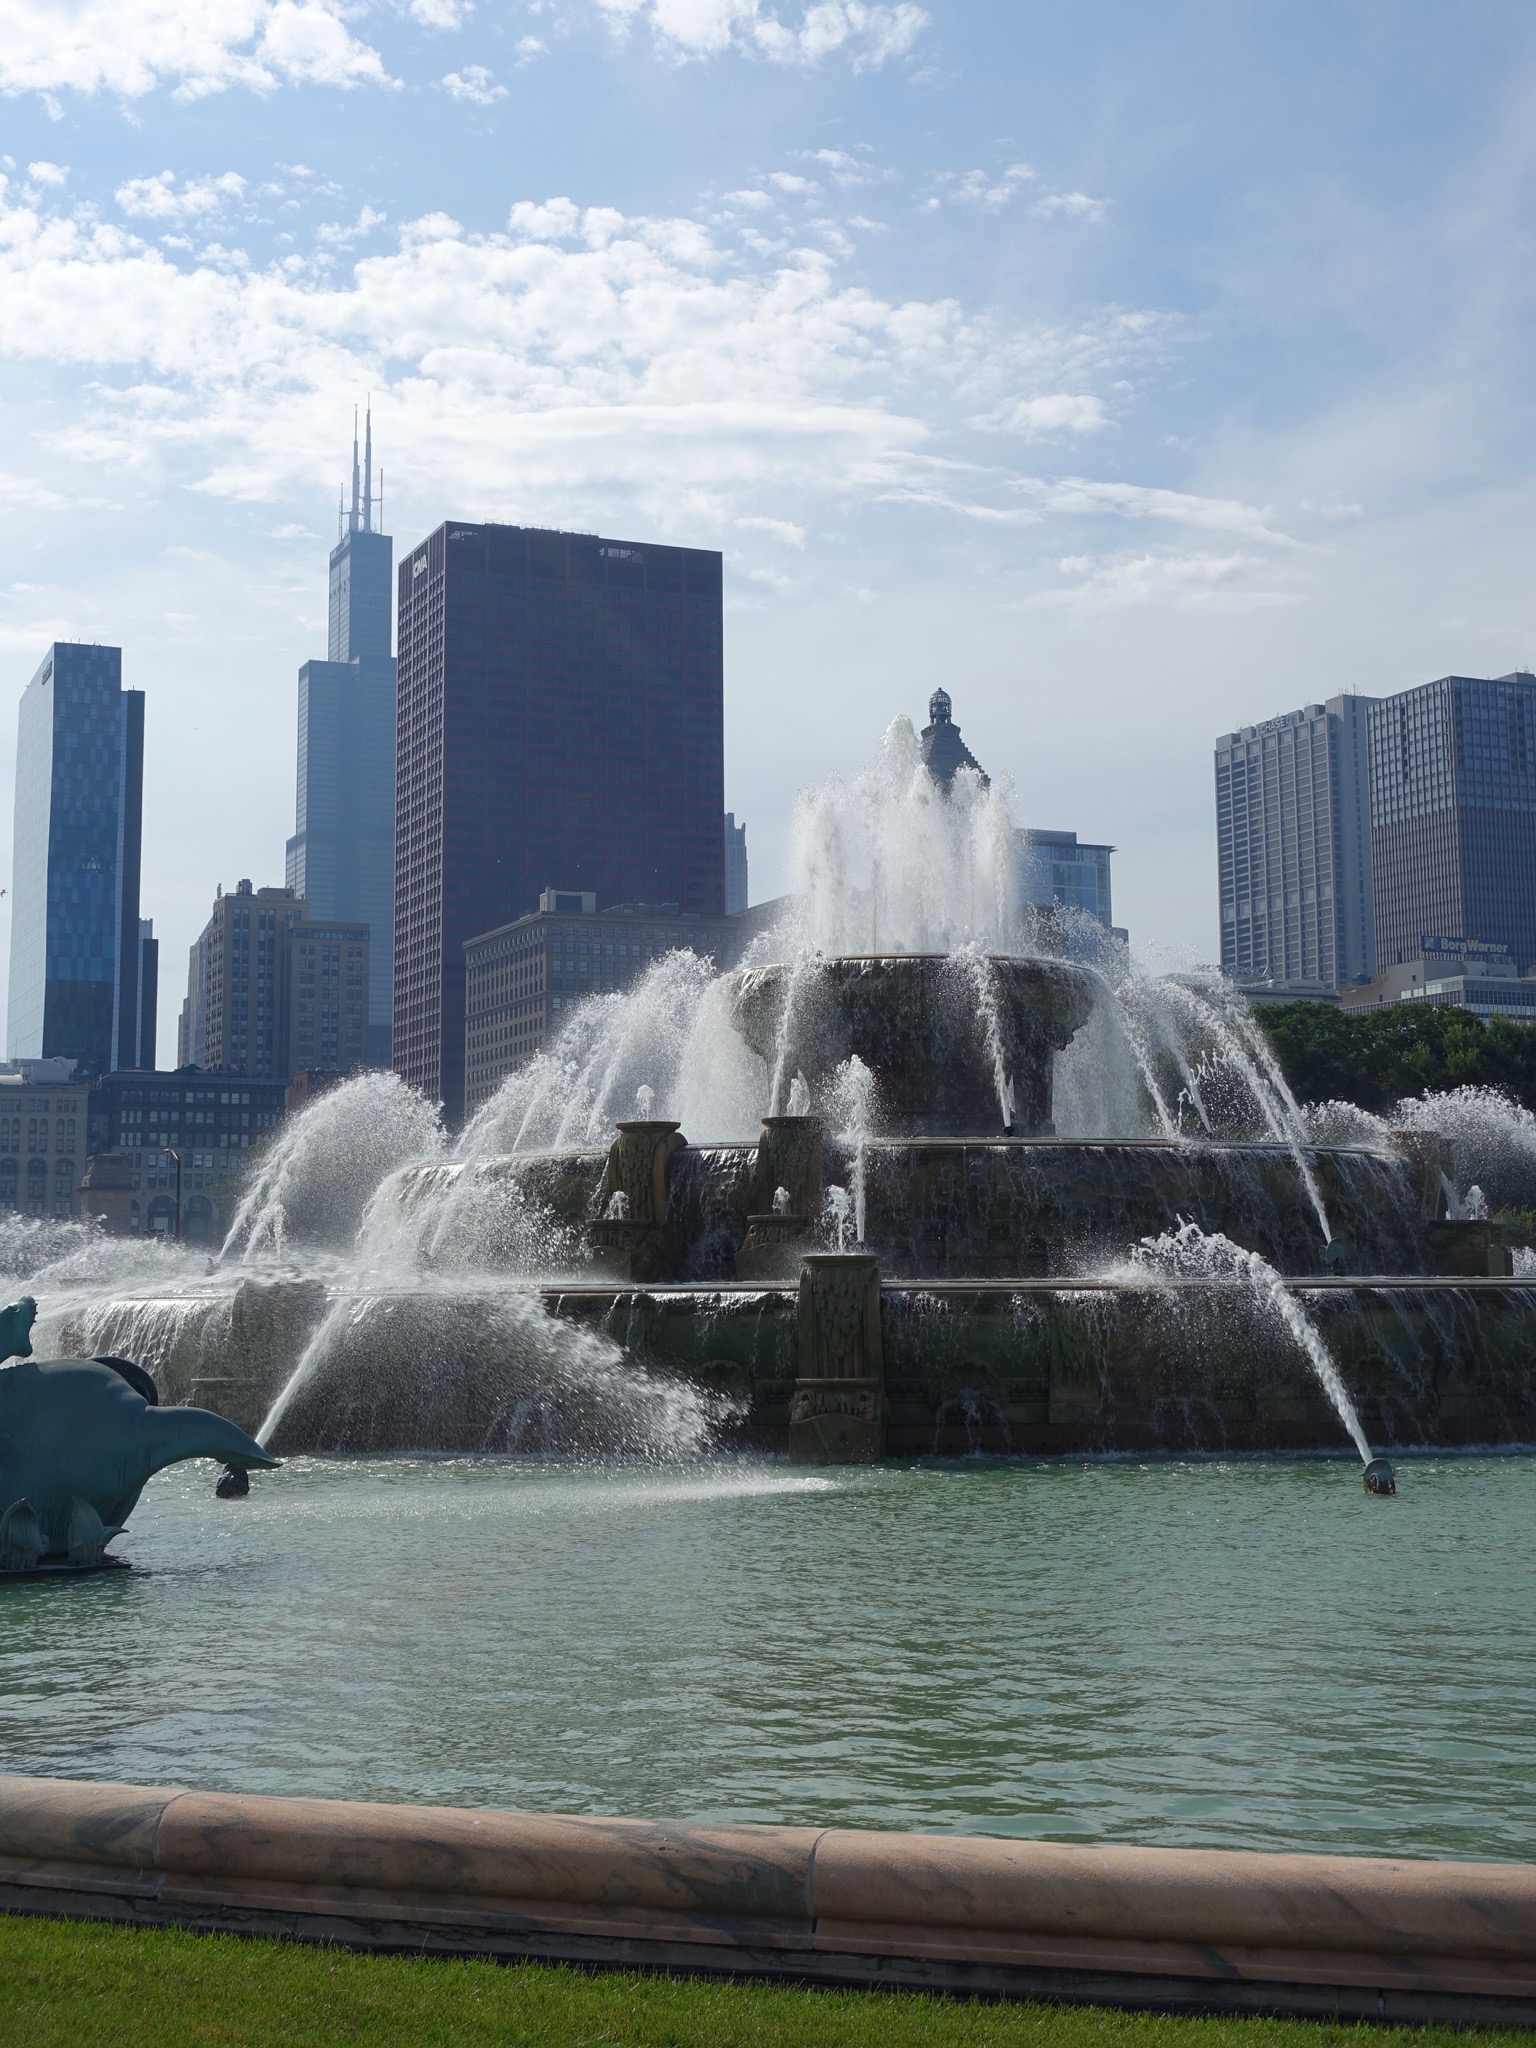 Photo 56 of 135 from the album Highlights Chicago 2015.